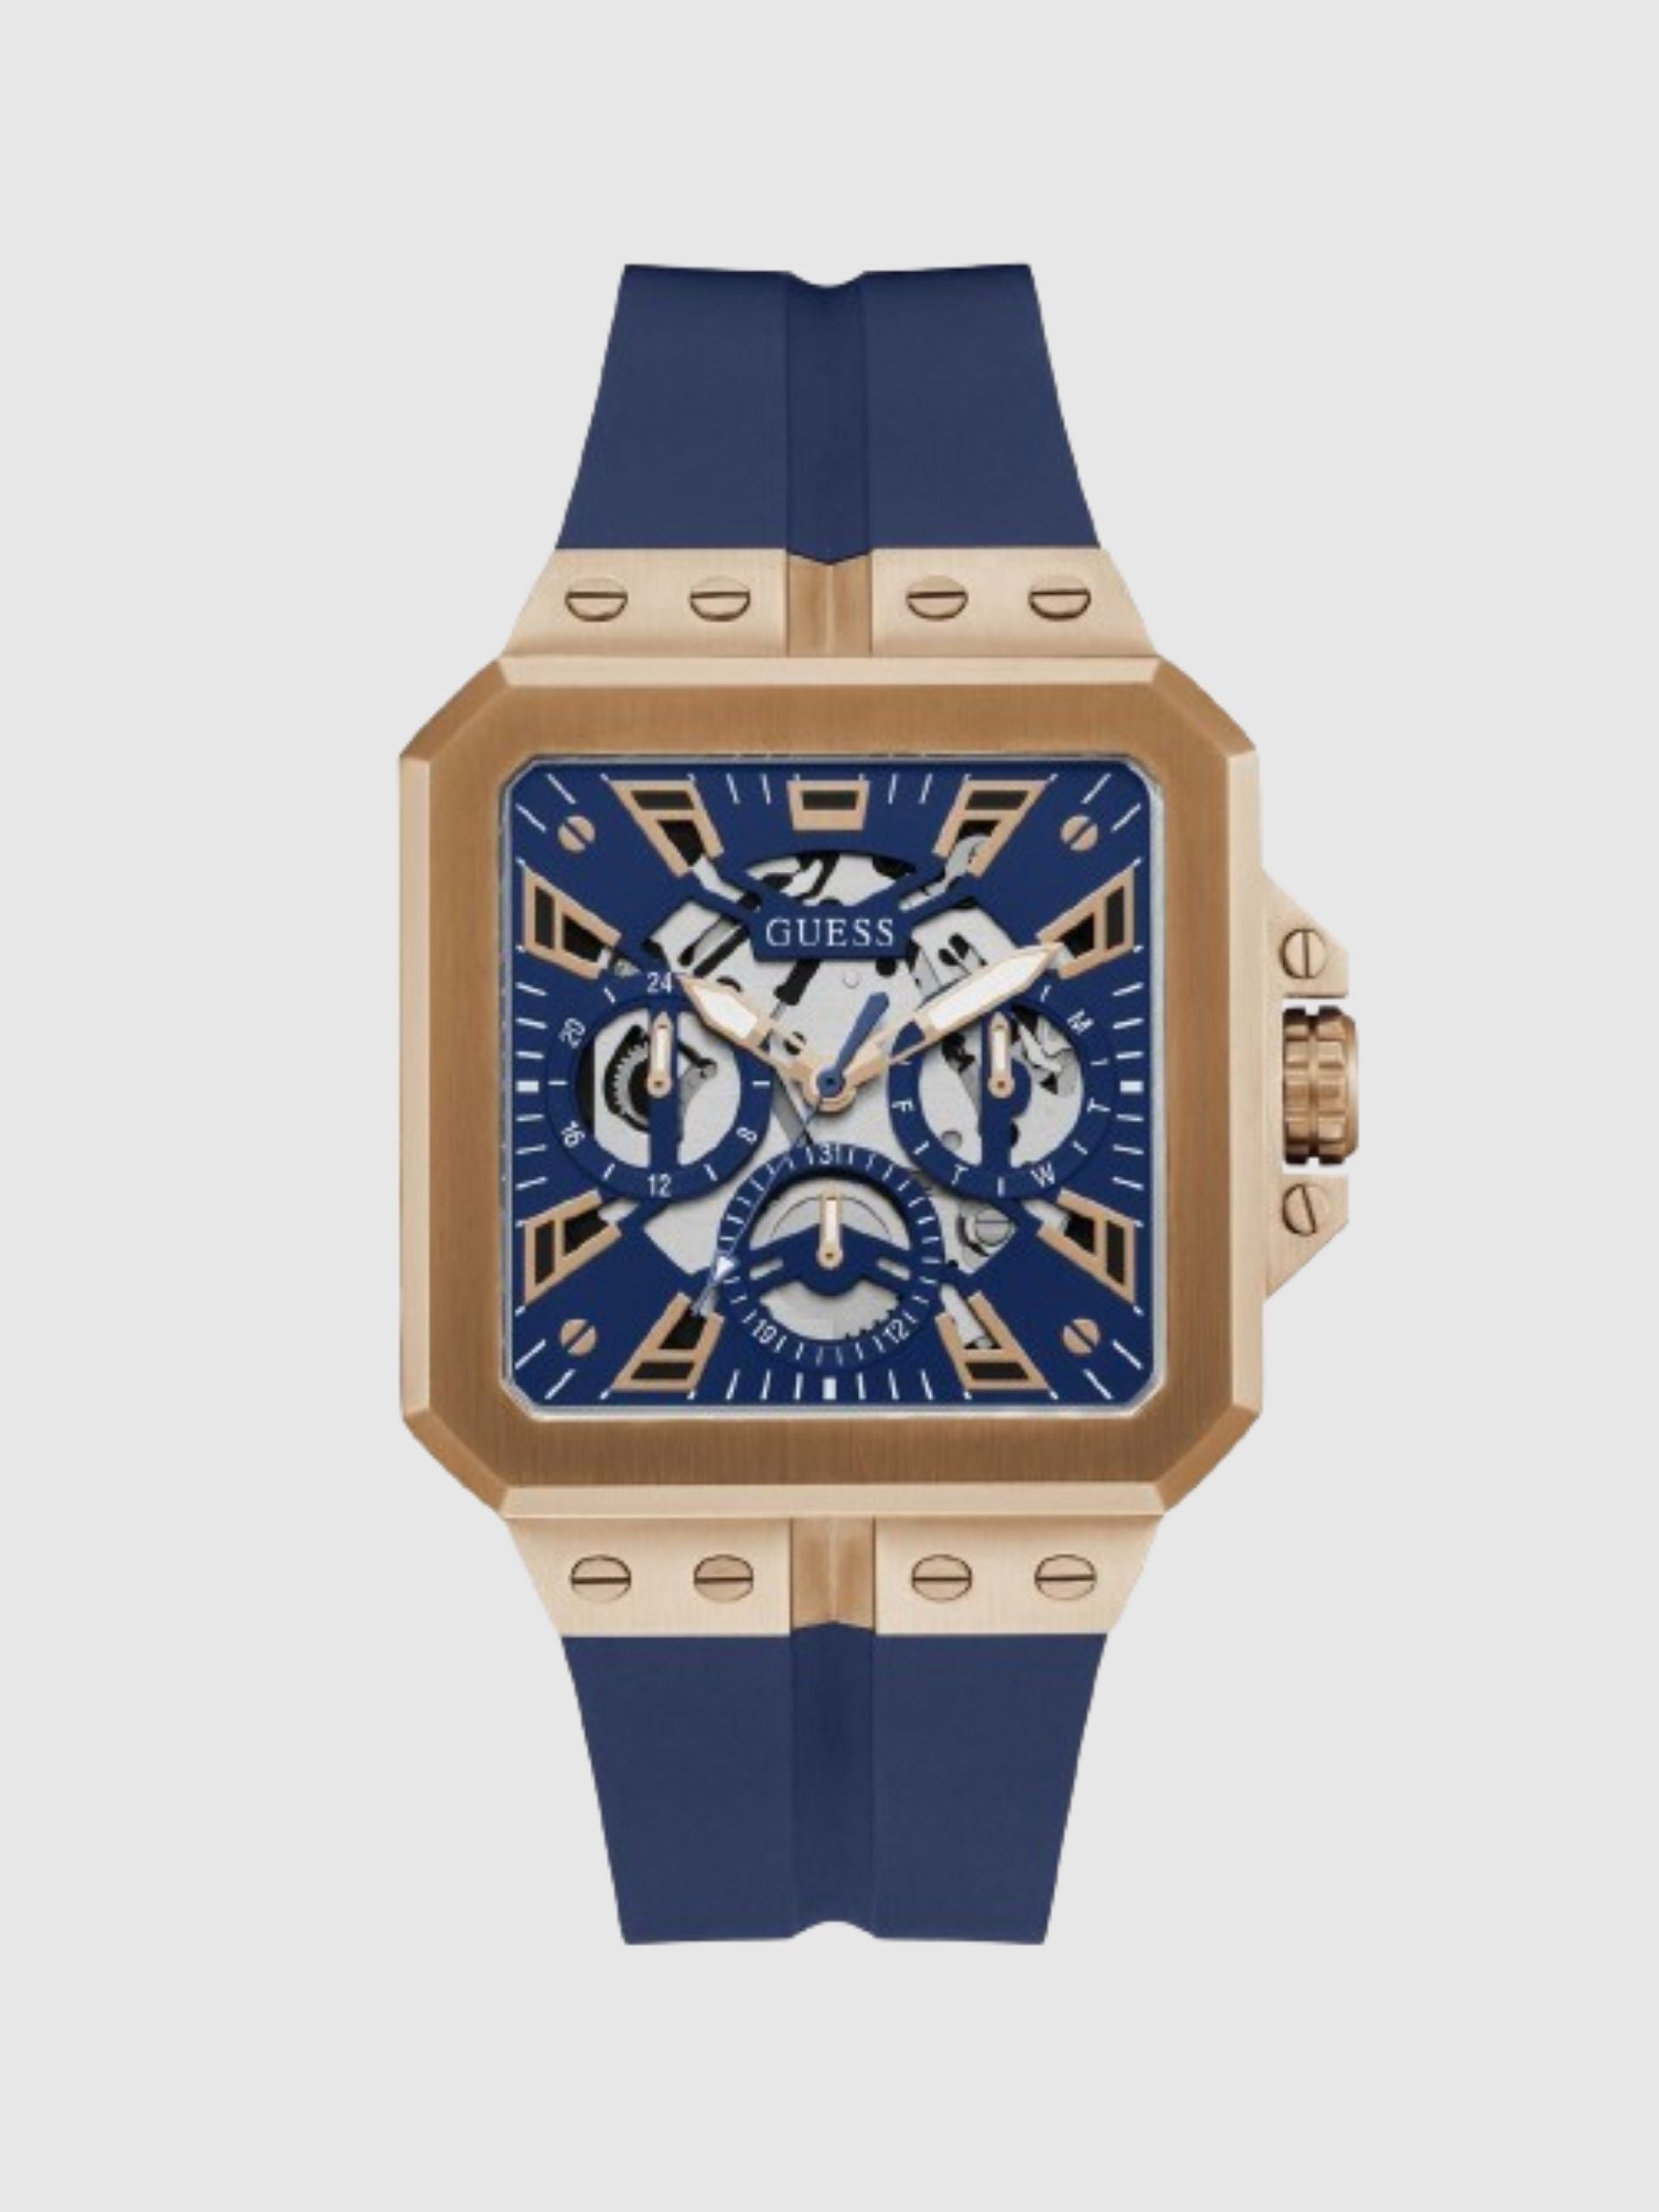 A WATCH DEDICATED TO LEO, CREATED BY VETERAN OFFICER - Smith & Bradley  Watches